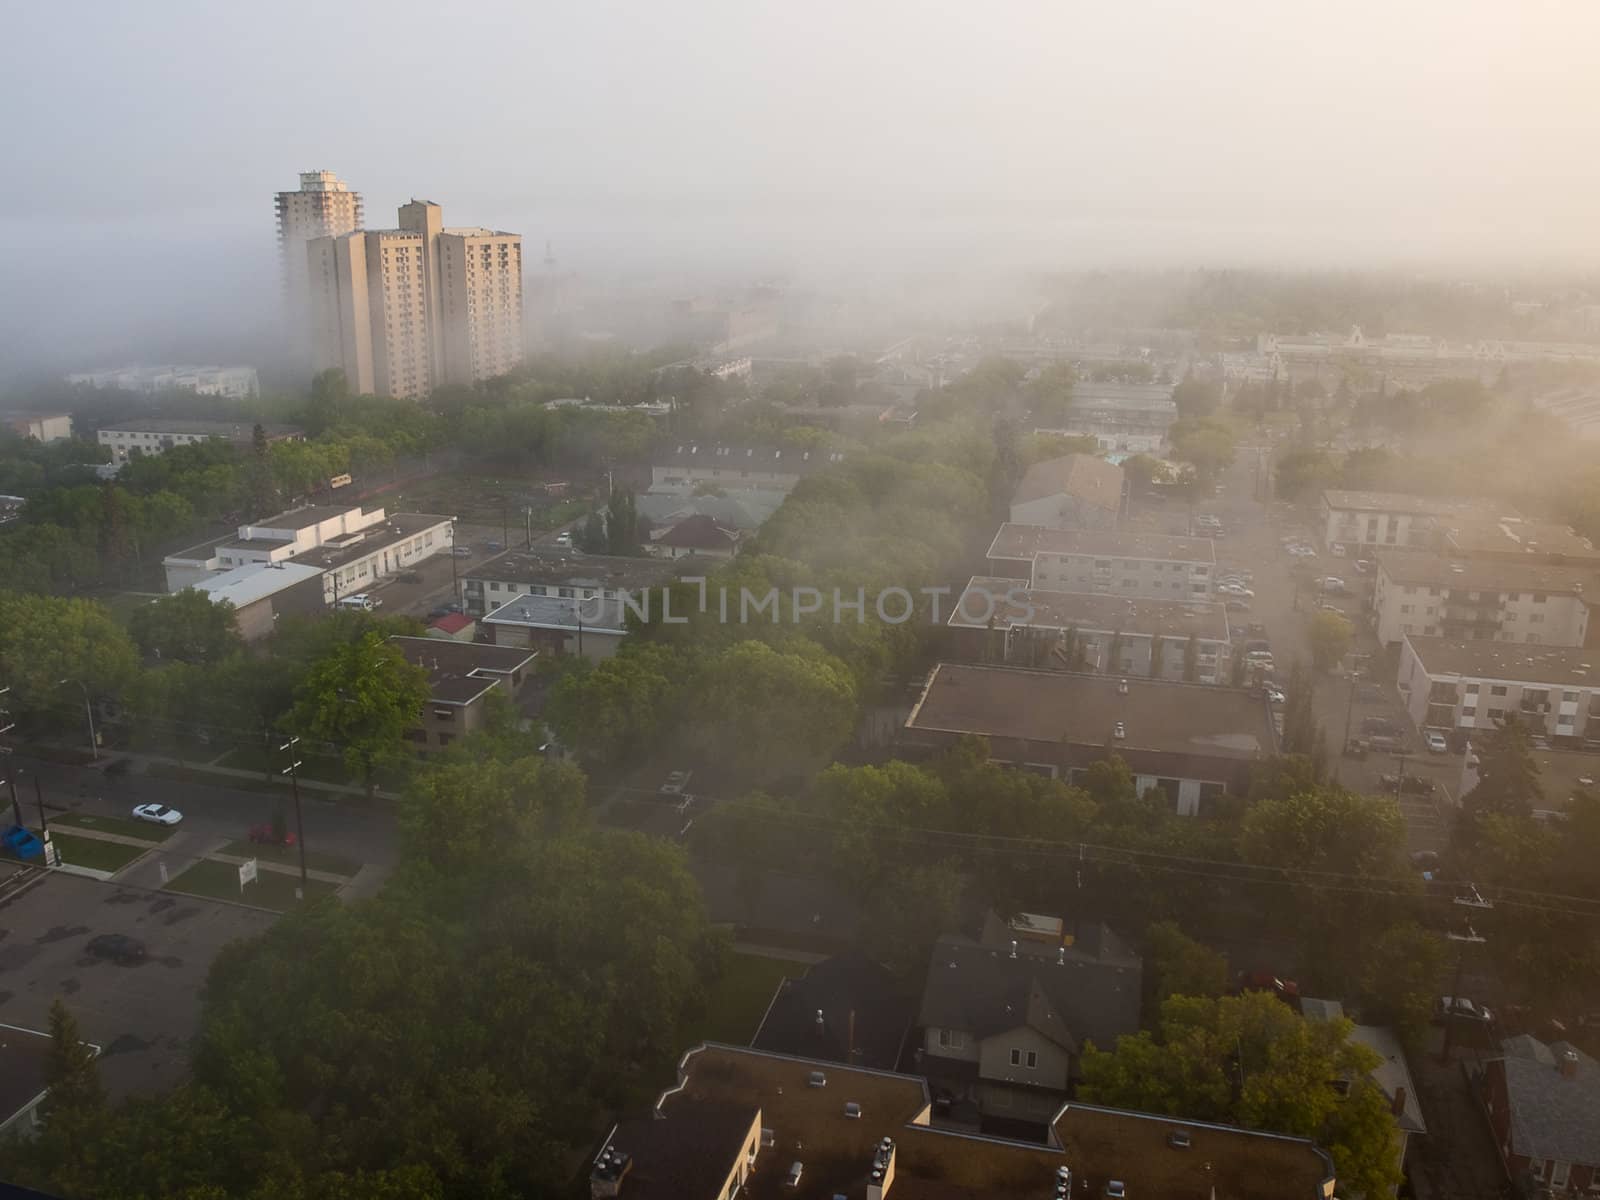 A blanket of fog rolling across a residential neighborhood on an August morning.